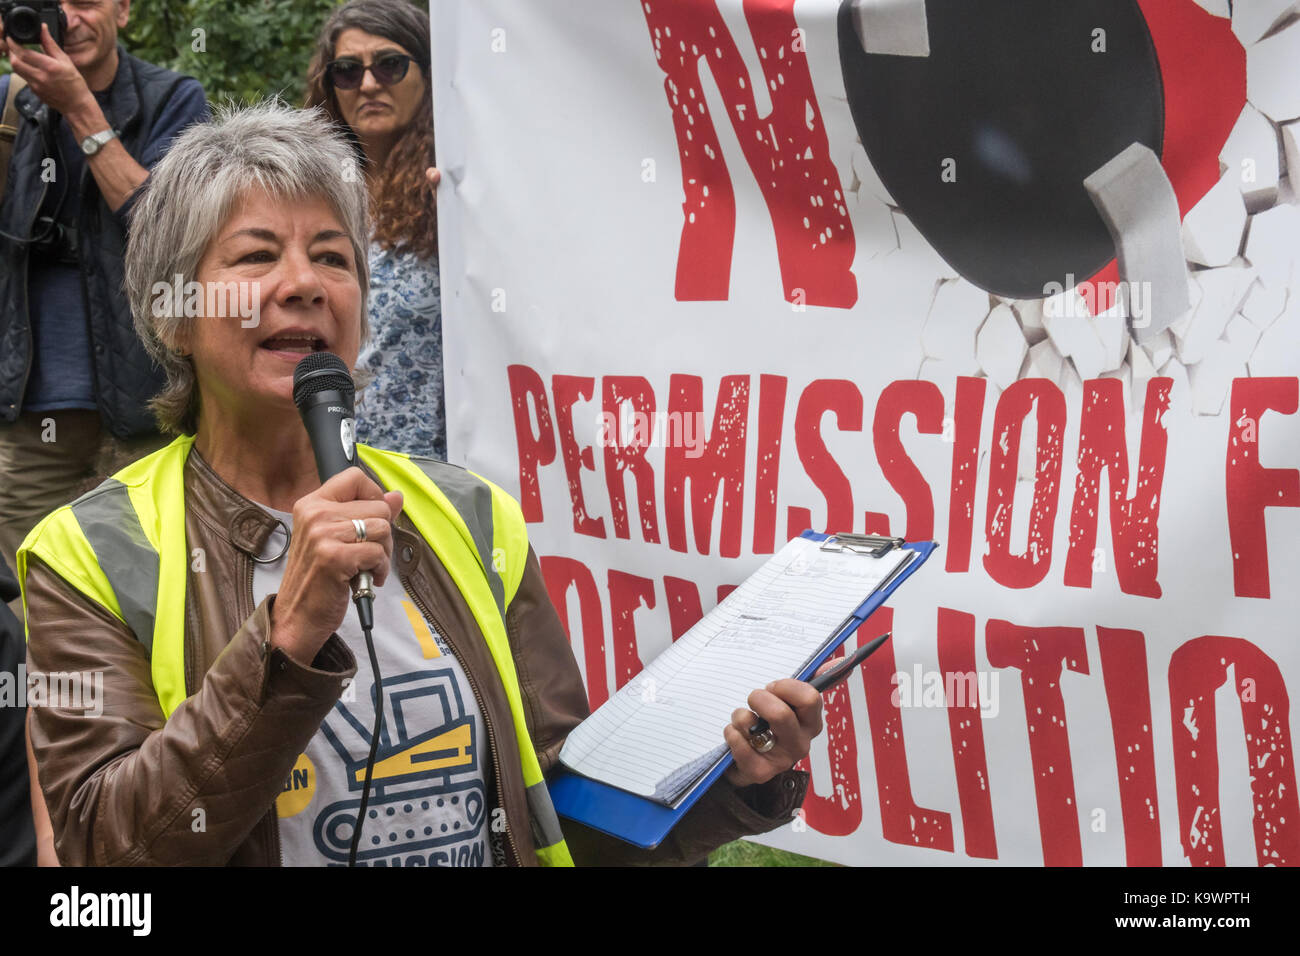 London, UK. 23rd Sep, 2017. London, UK. 23rd September 2017. Jenny Sutton of StopHDV introduces the speakers at the rally in Tottenham before hundred march to Finsbury Park against the so called Haringey Development Vehicle, under which Haringey Council is making a huge transfer of council housing to Australian multinational Lendlease. This will result in the imminent demolition of over 1,300 council homes on the Northumberland Park estate, followed by similar loss of social housing across the whole of the borough. At Â£2 billion, his is the largest giveaway of council housing and assets Stock Photo